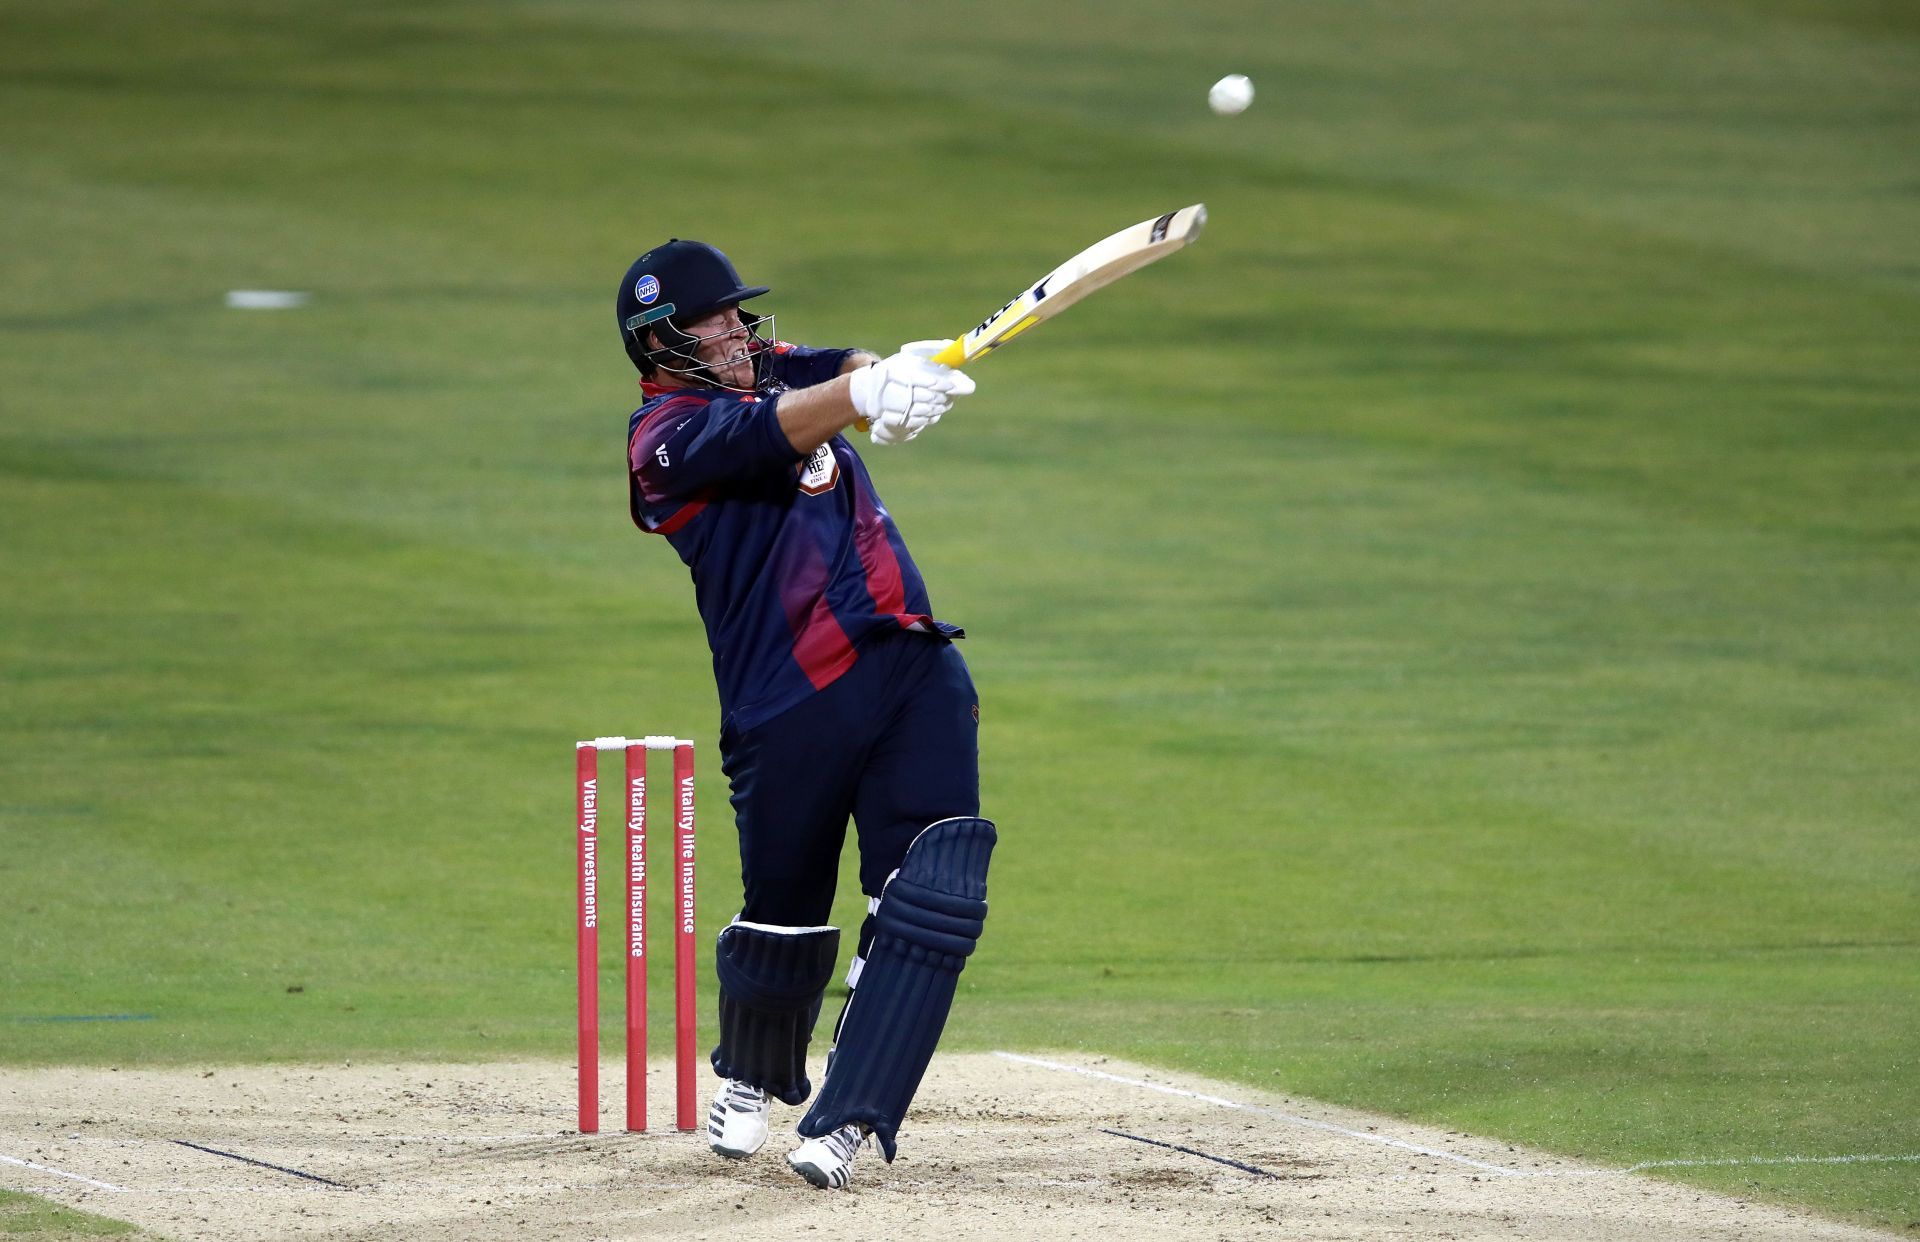 Richard Levi smashed a hundred in his second international match (Image: Getty)